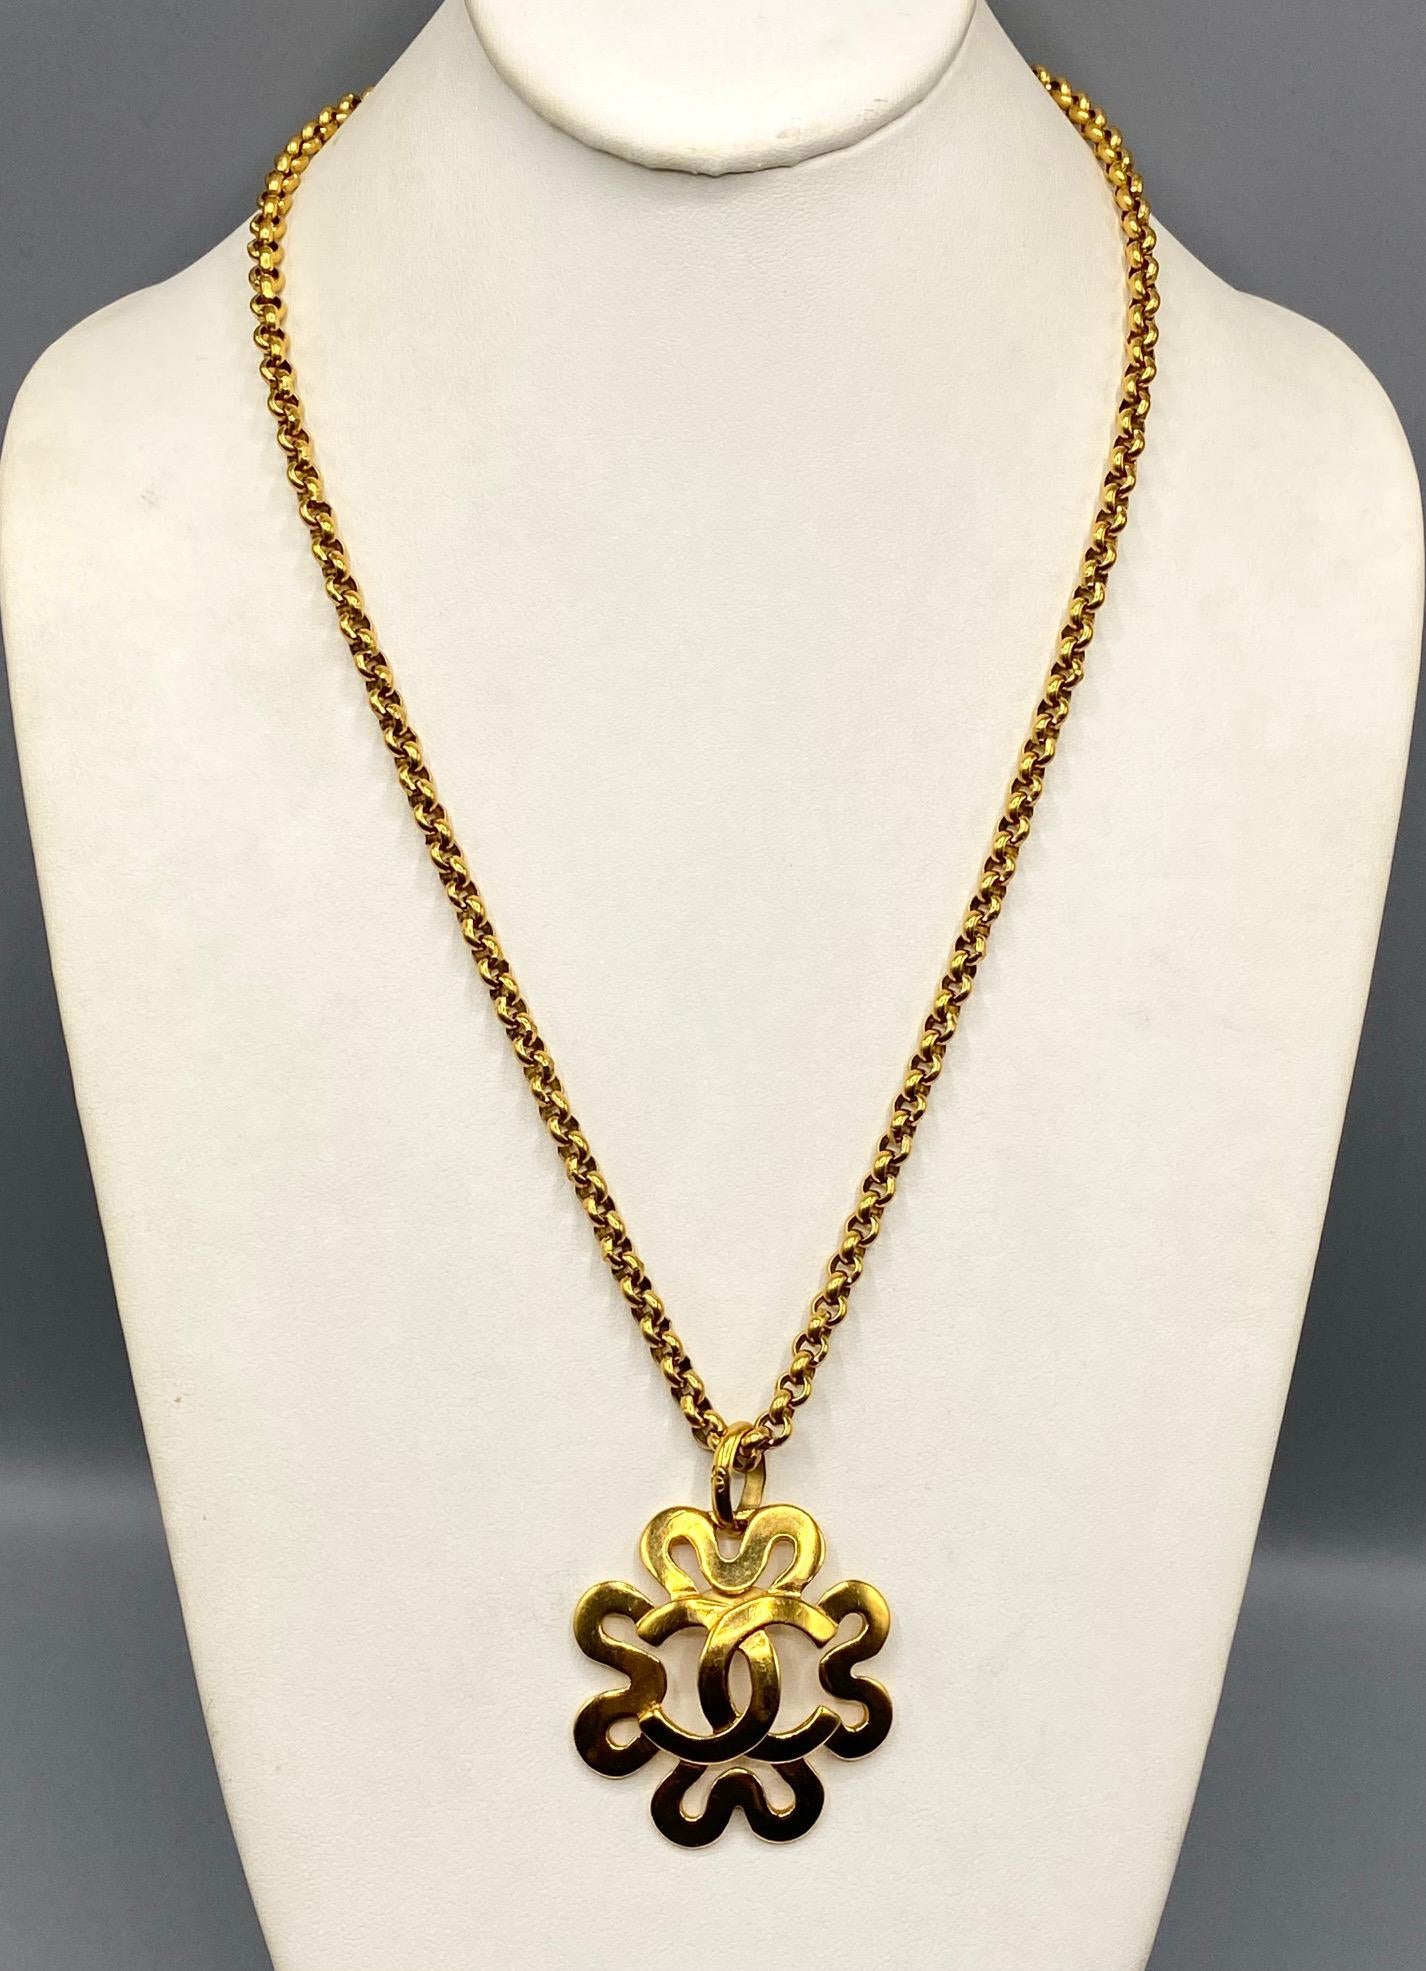 Chanel gold tone flower pendant necklace from the Spring 1995 collection. The round link chain measures 23.5 inches long. The openwork flower pendant is 1.63 inches wide and 2 inches long including the bail. Additionally, the front and the back of